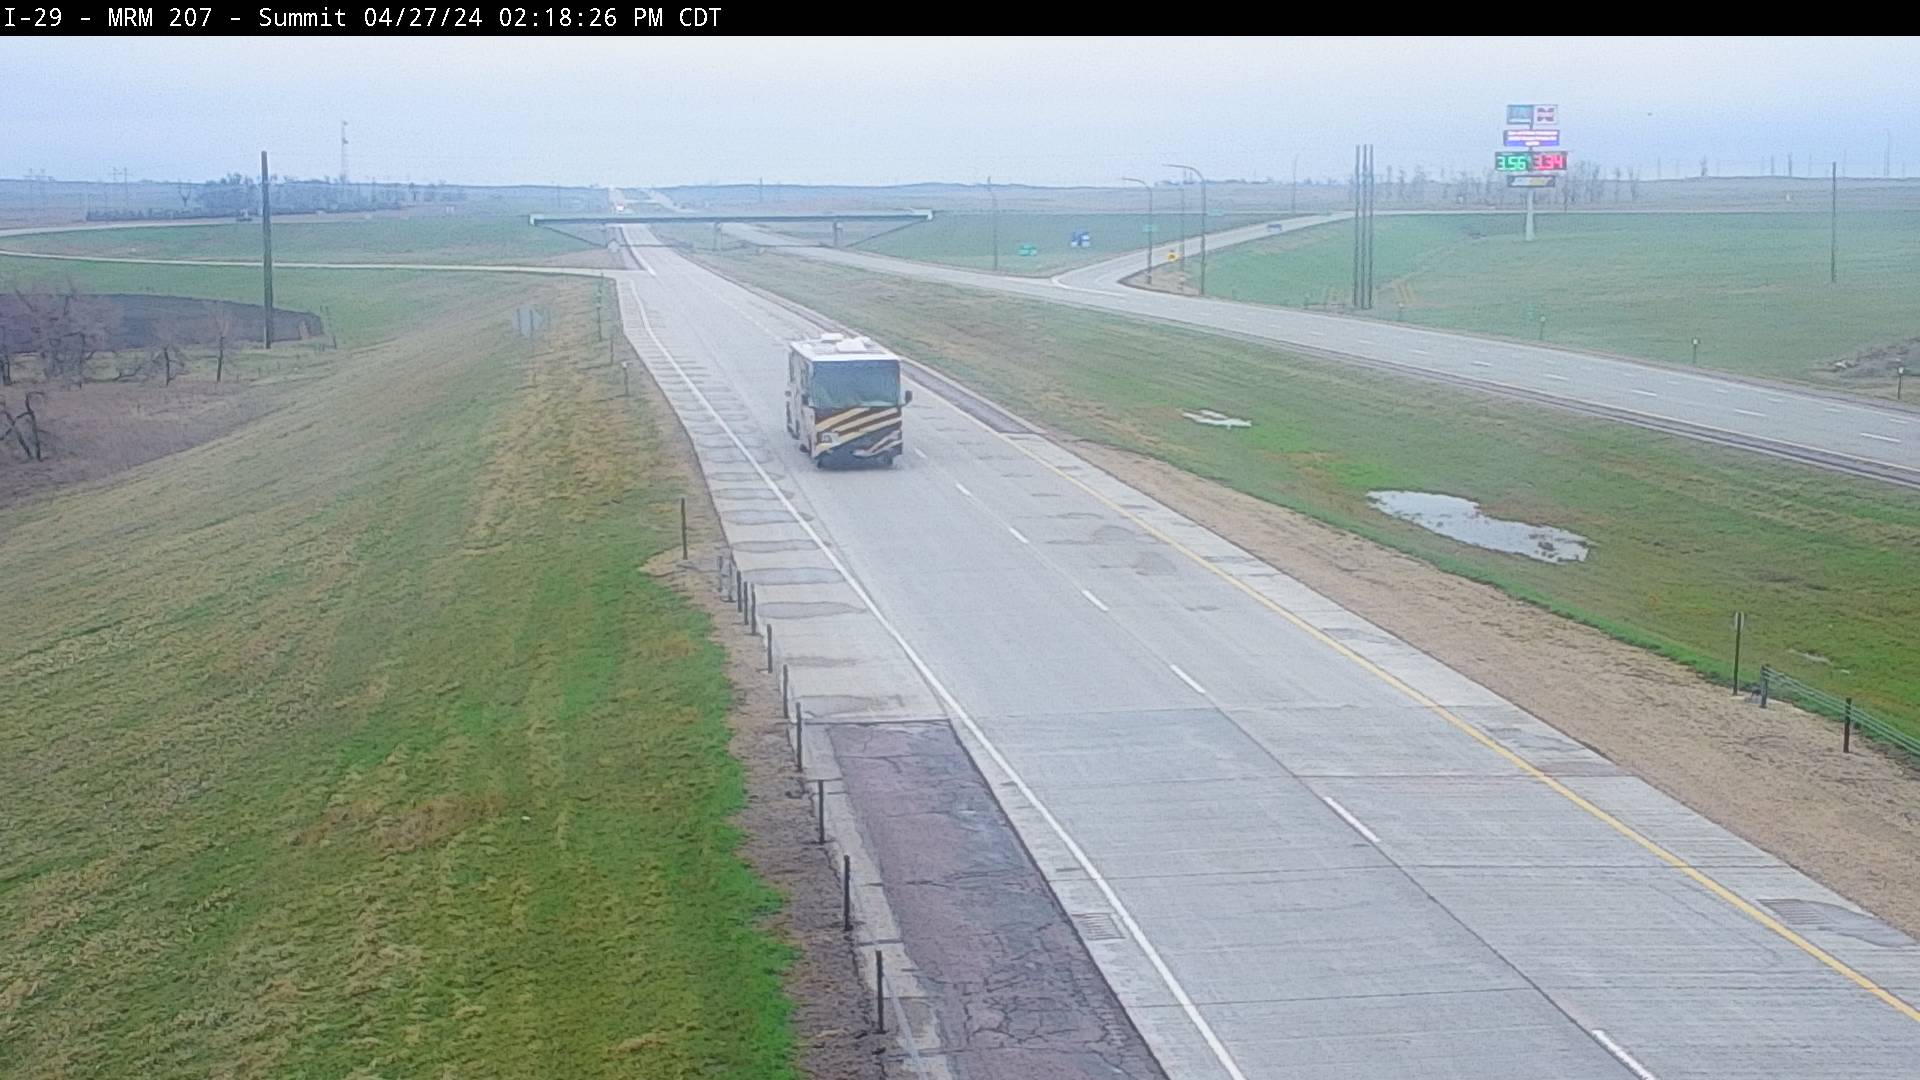 Traffic Cam West of town along I-29 @ MP 207 - North Player